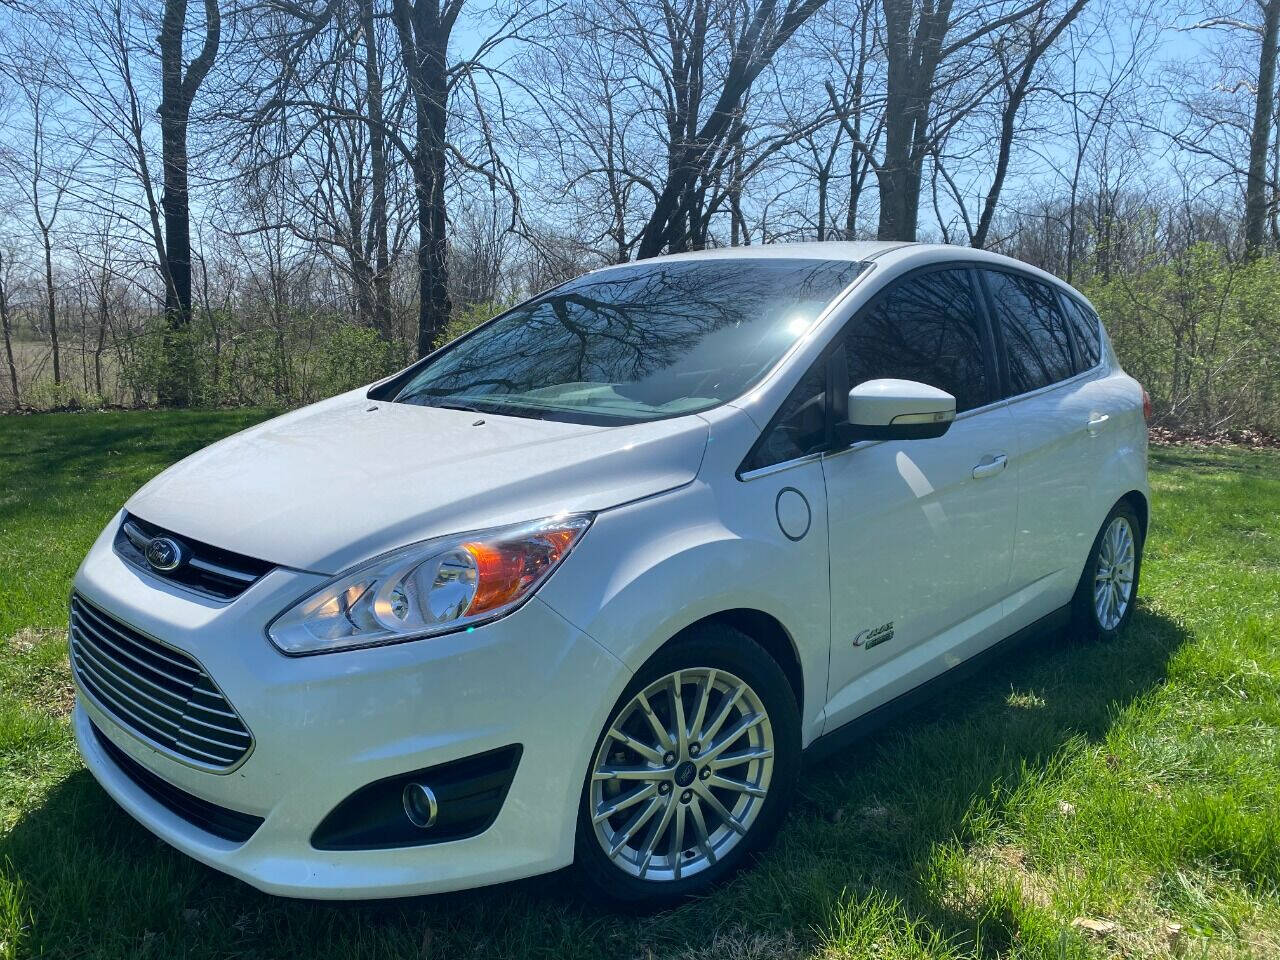 Ford C Max For Sale In Indiana Carsforsale Com